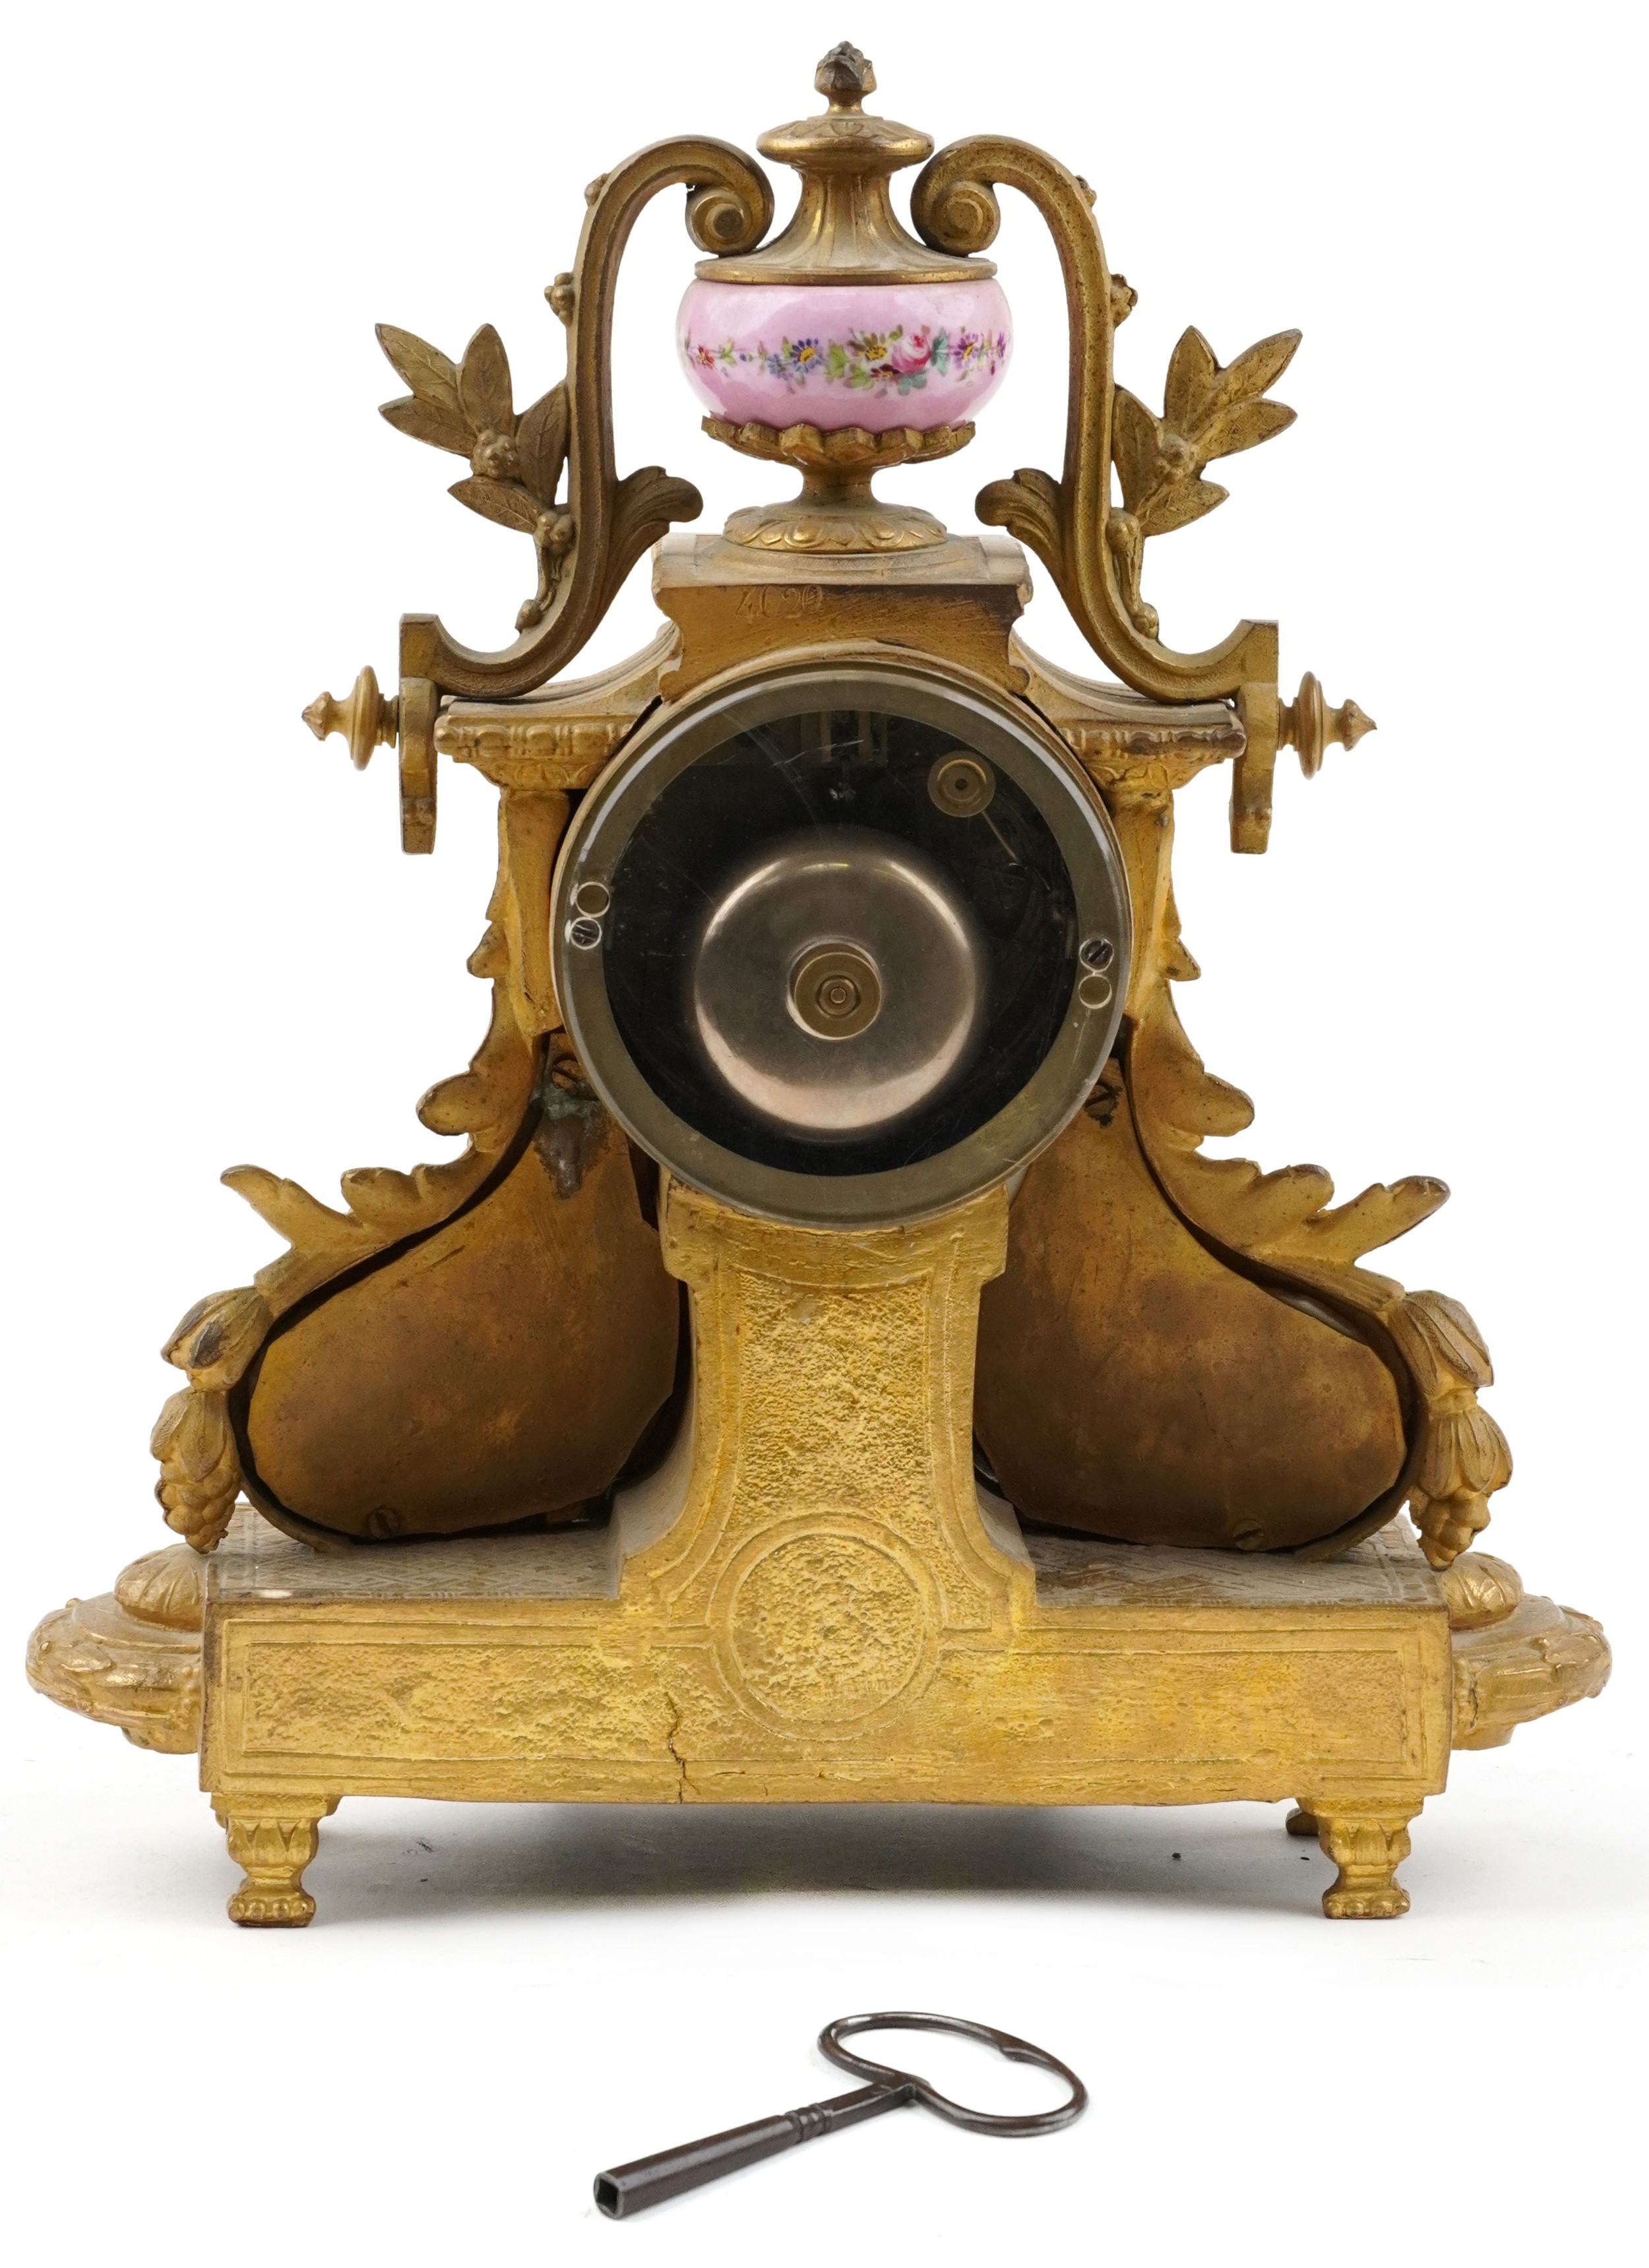 19th century French ormolu mantle clock striking on a bell having urn finial and Sevres type - Image 3 of 4